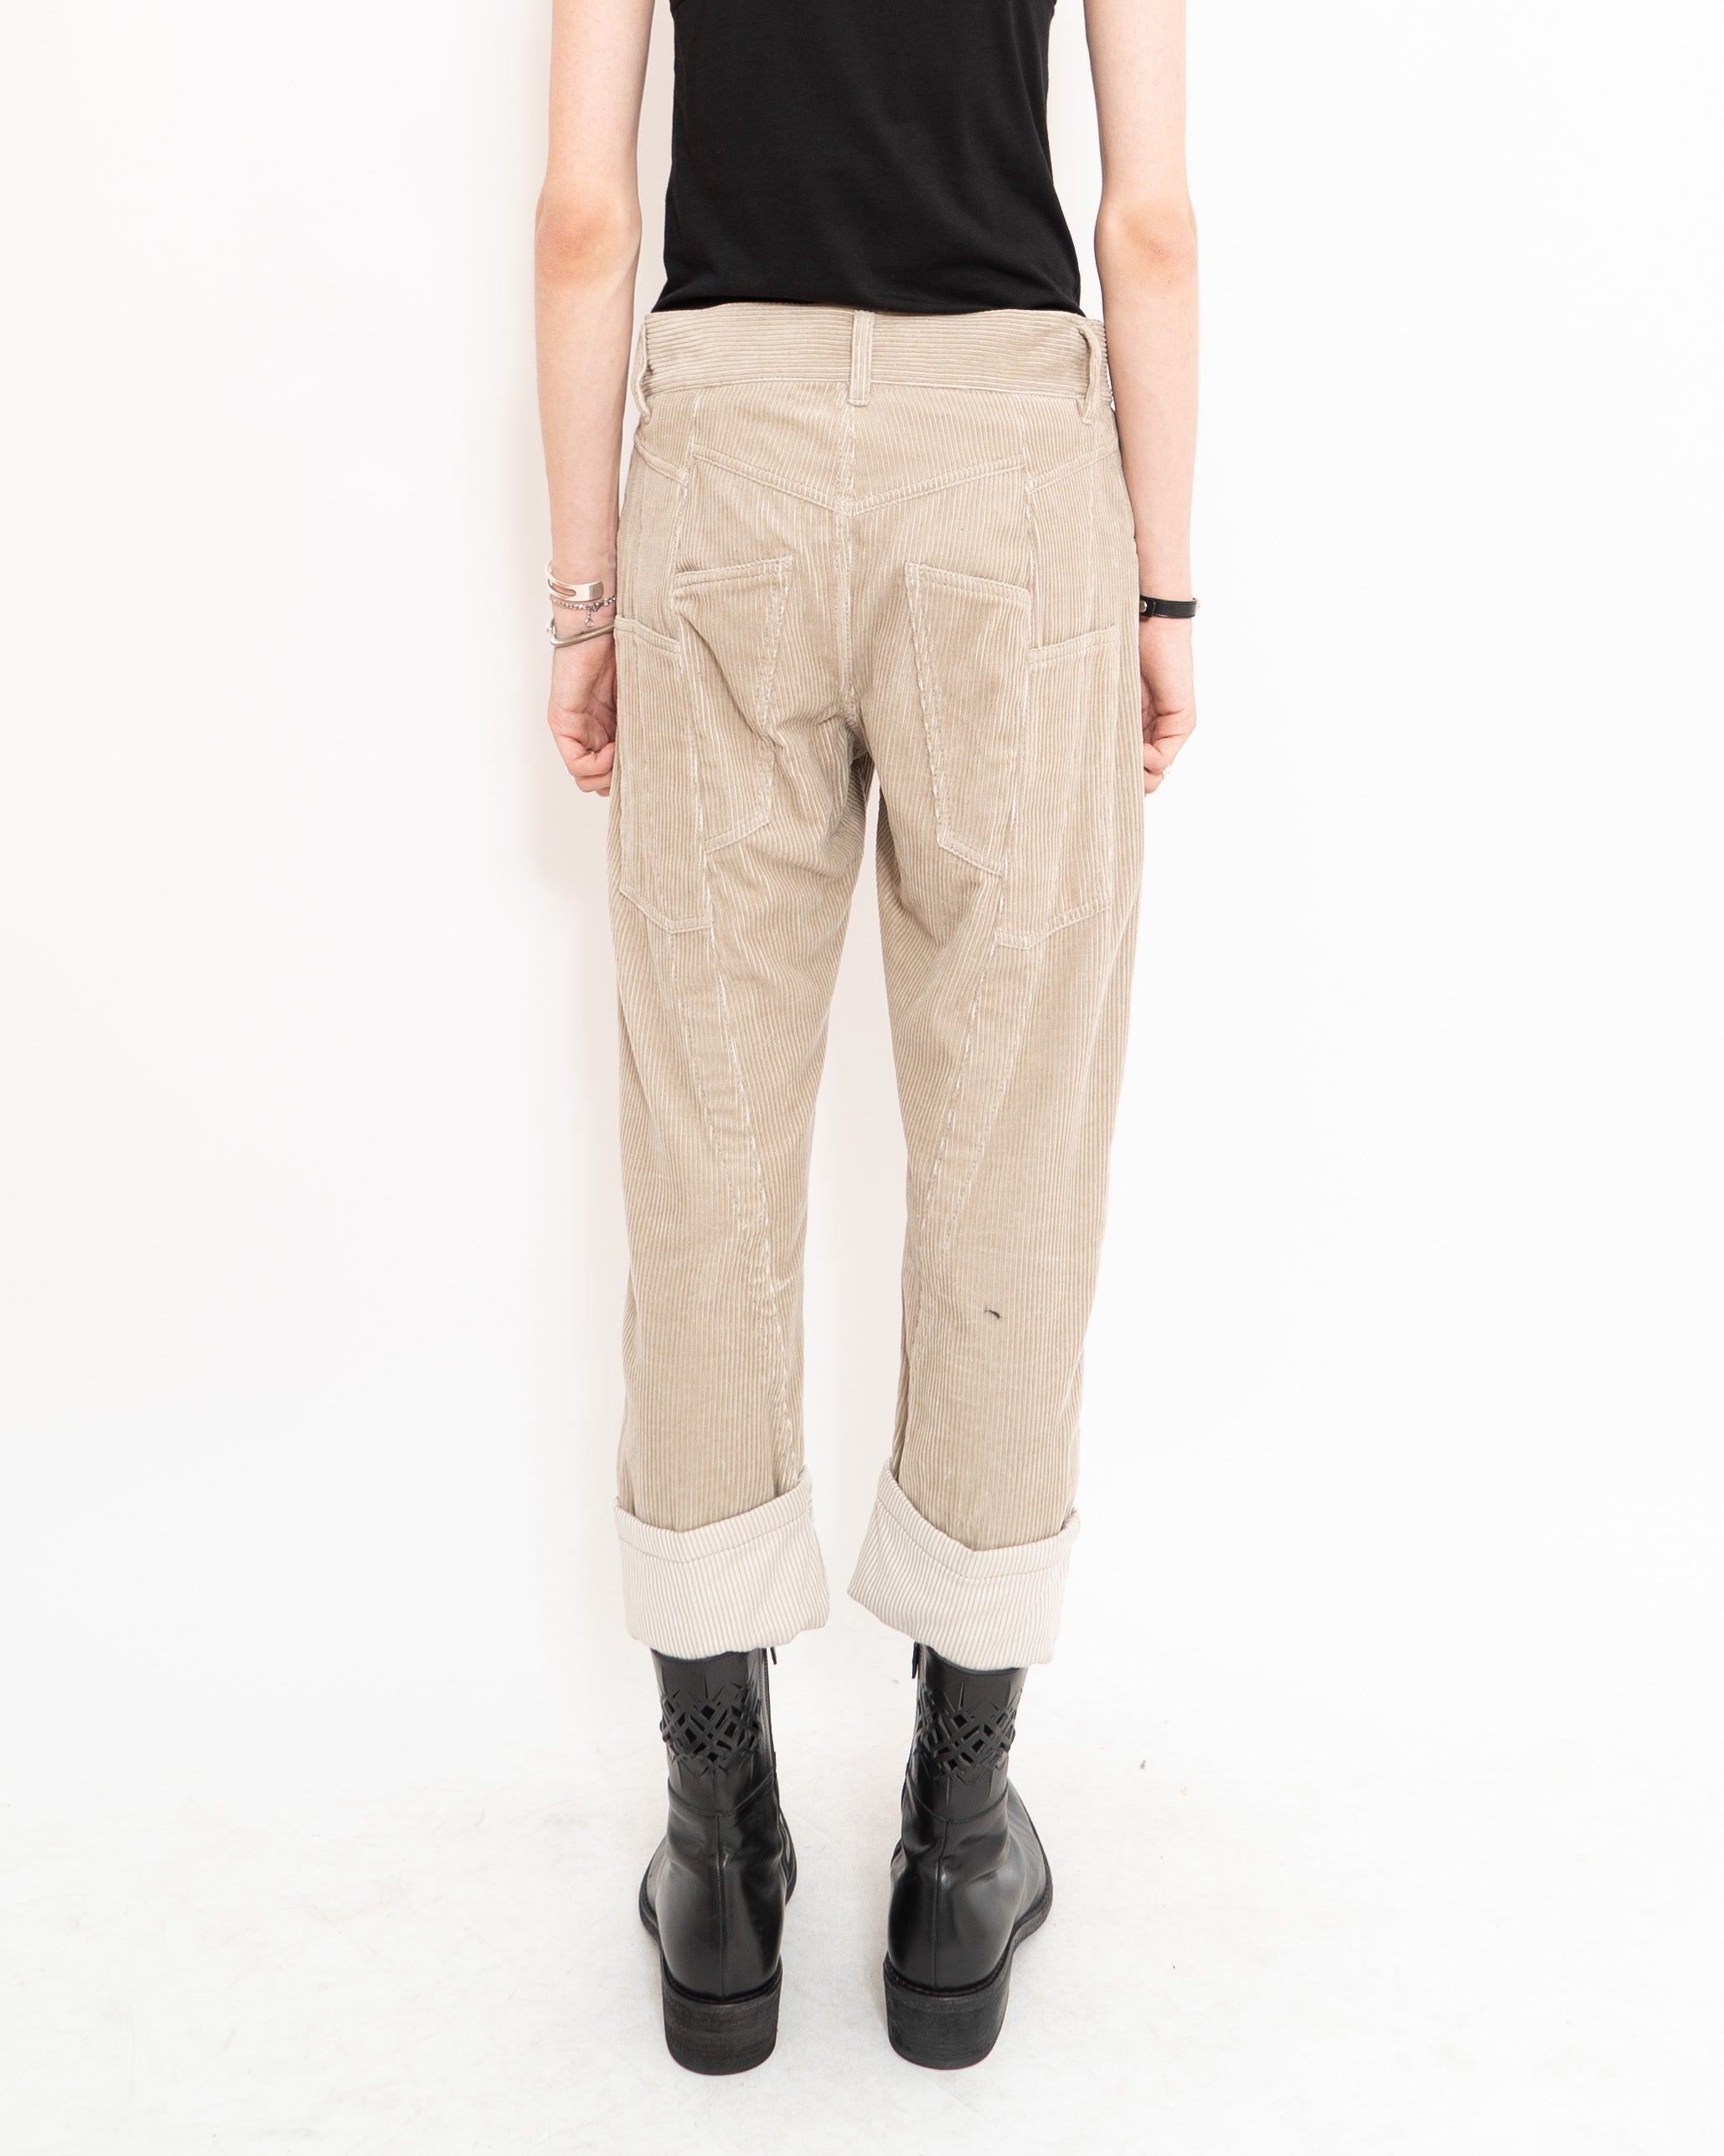 FW16 Beige Deconstruced Cord Trousers Sample